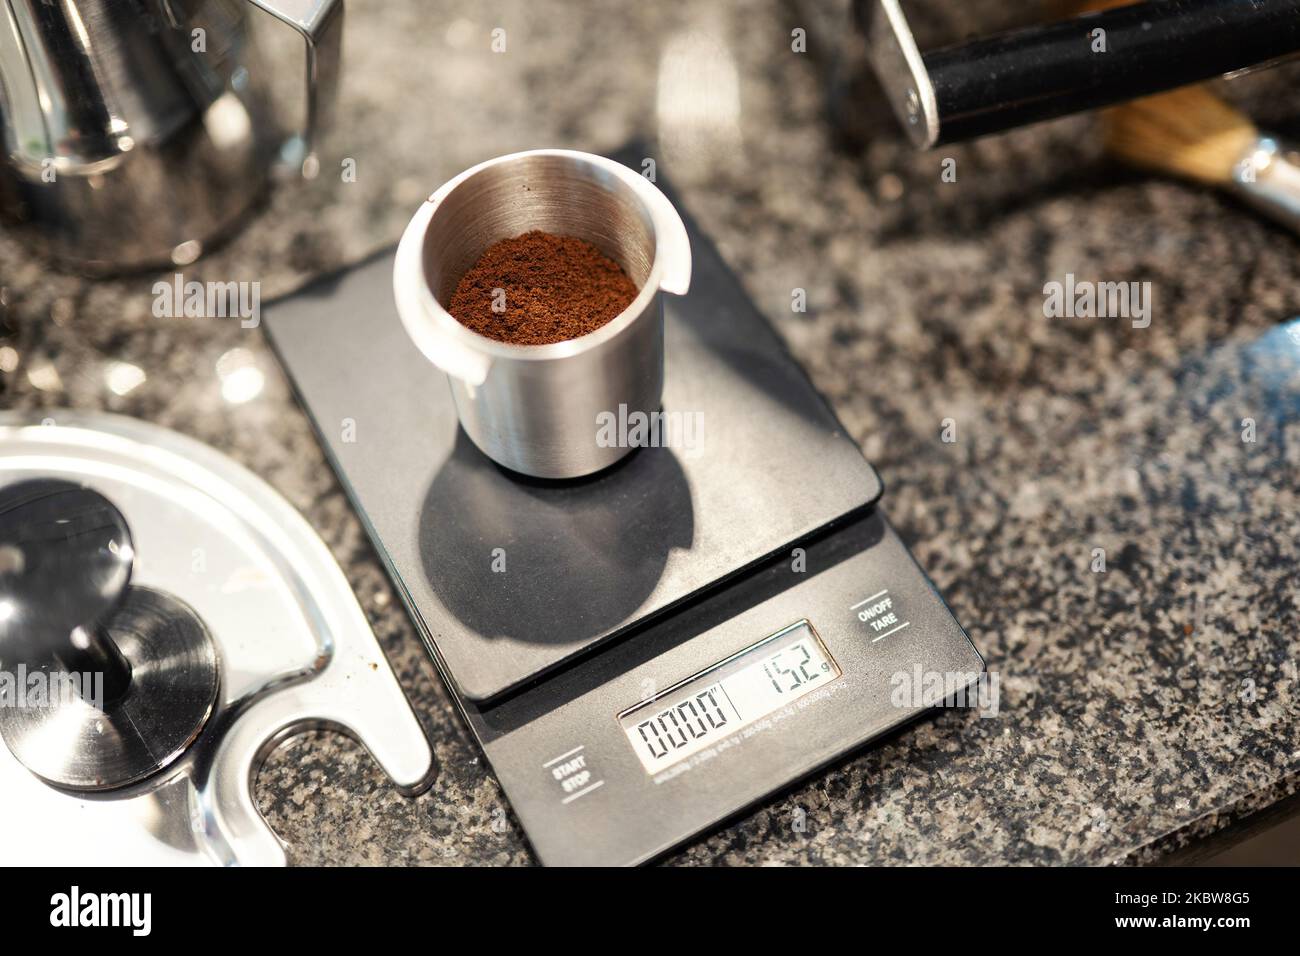 Freshly ground coffee is precisely weighed on a kitchen scale in an aluminum container. Stock Photo